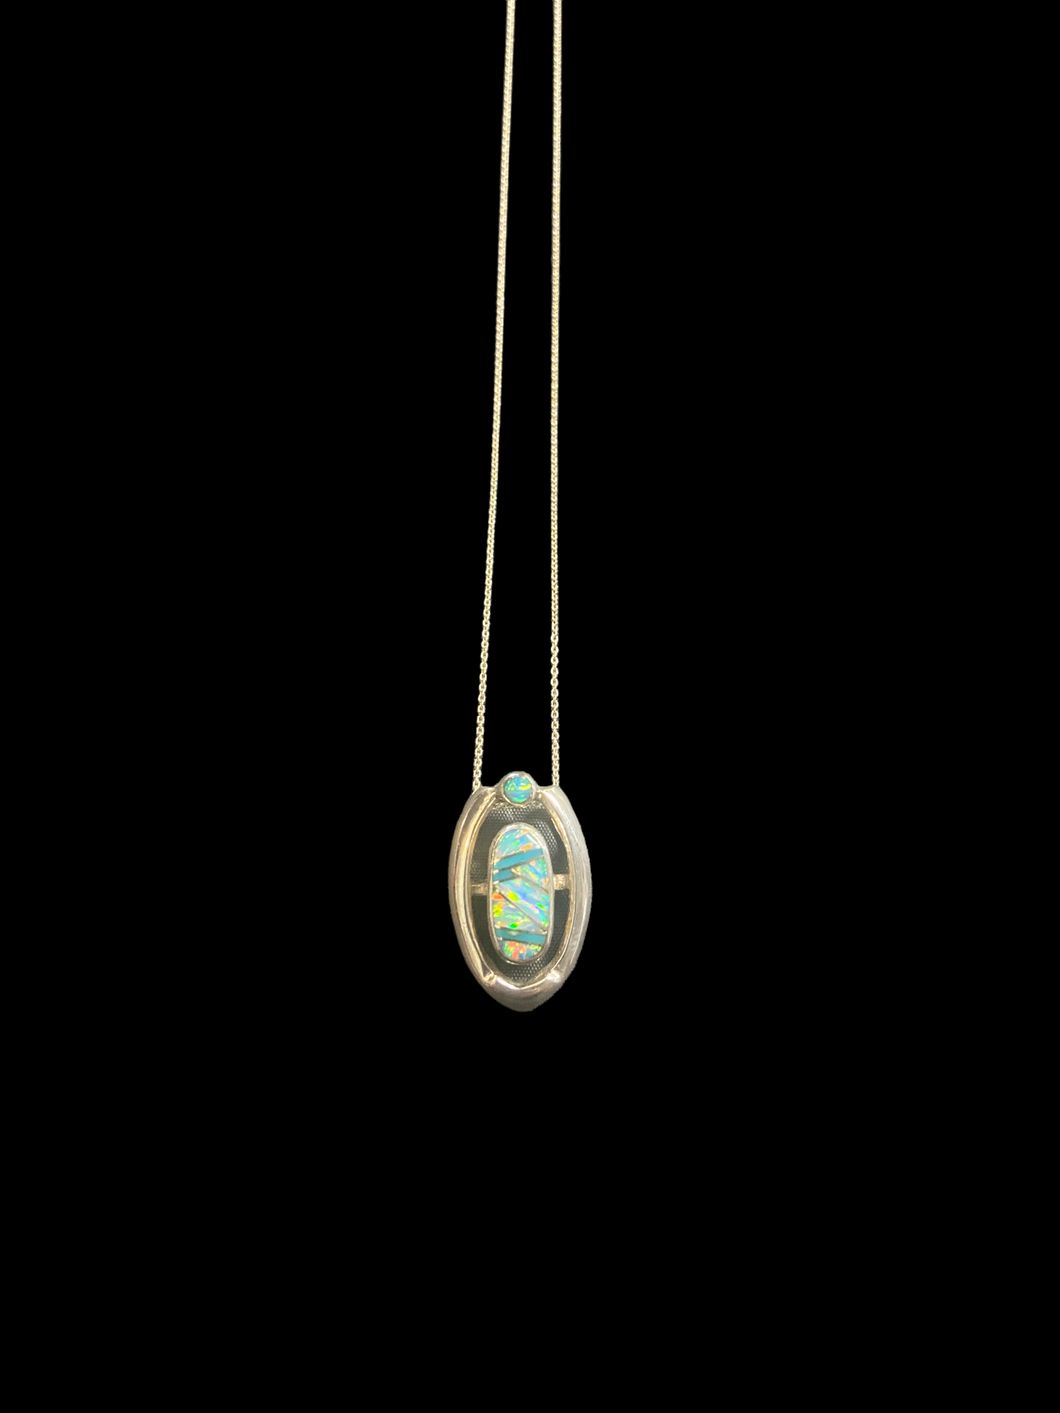 Sterling Silver & Opal Necklace